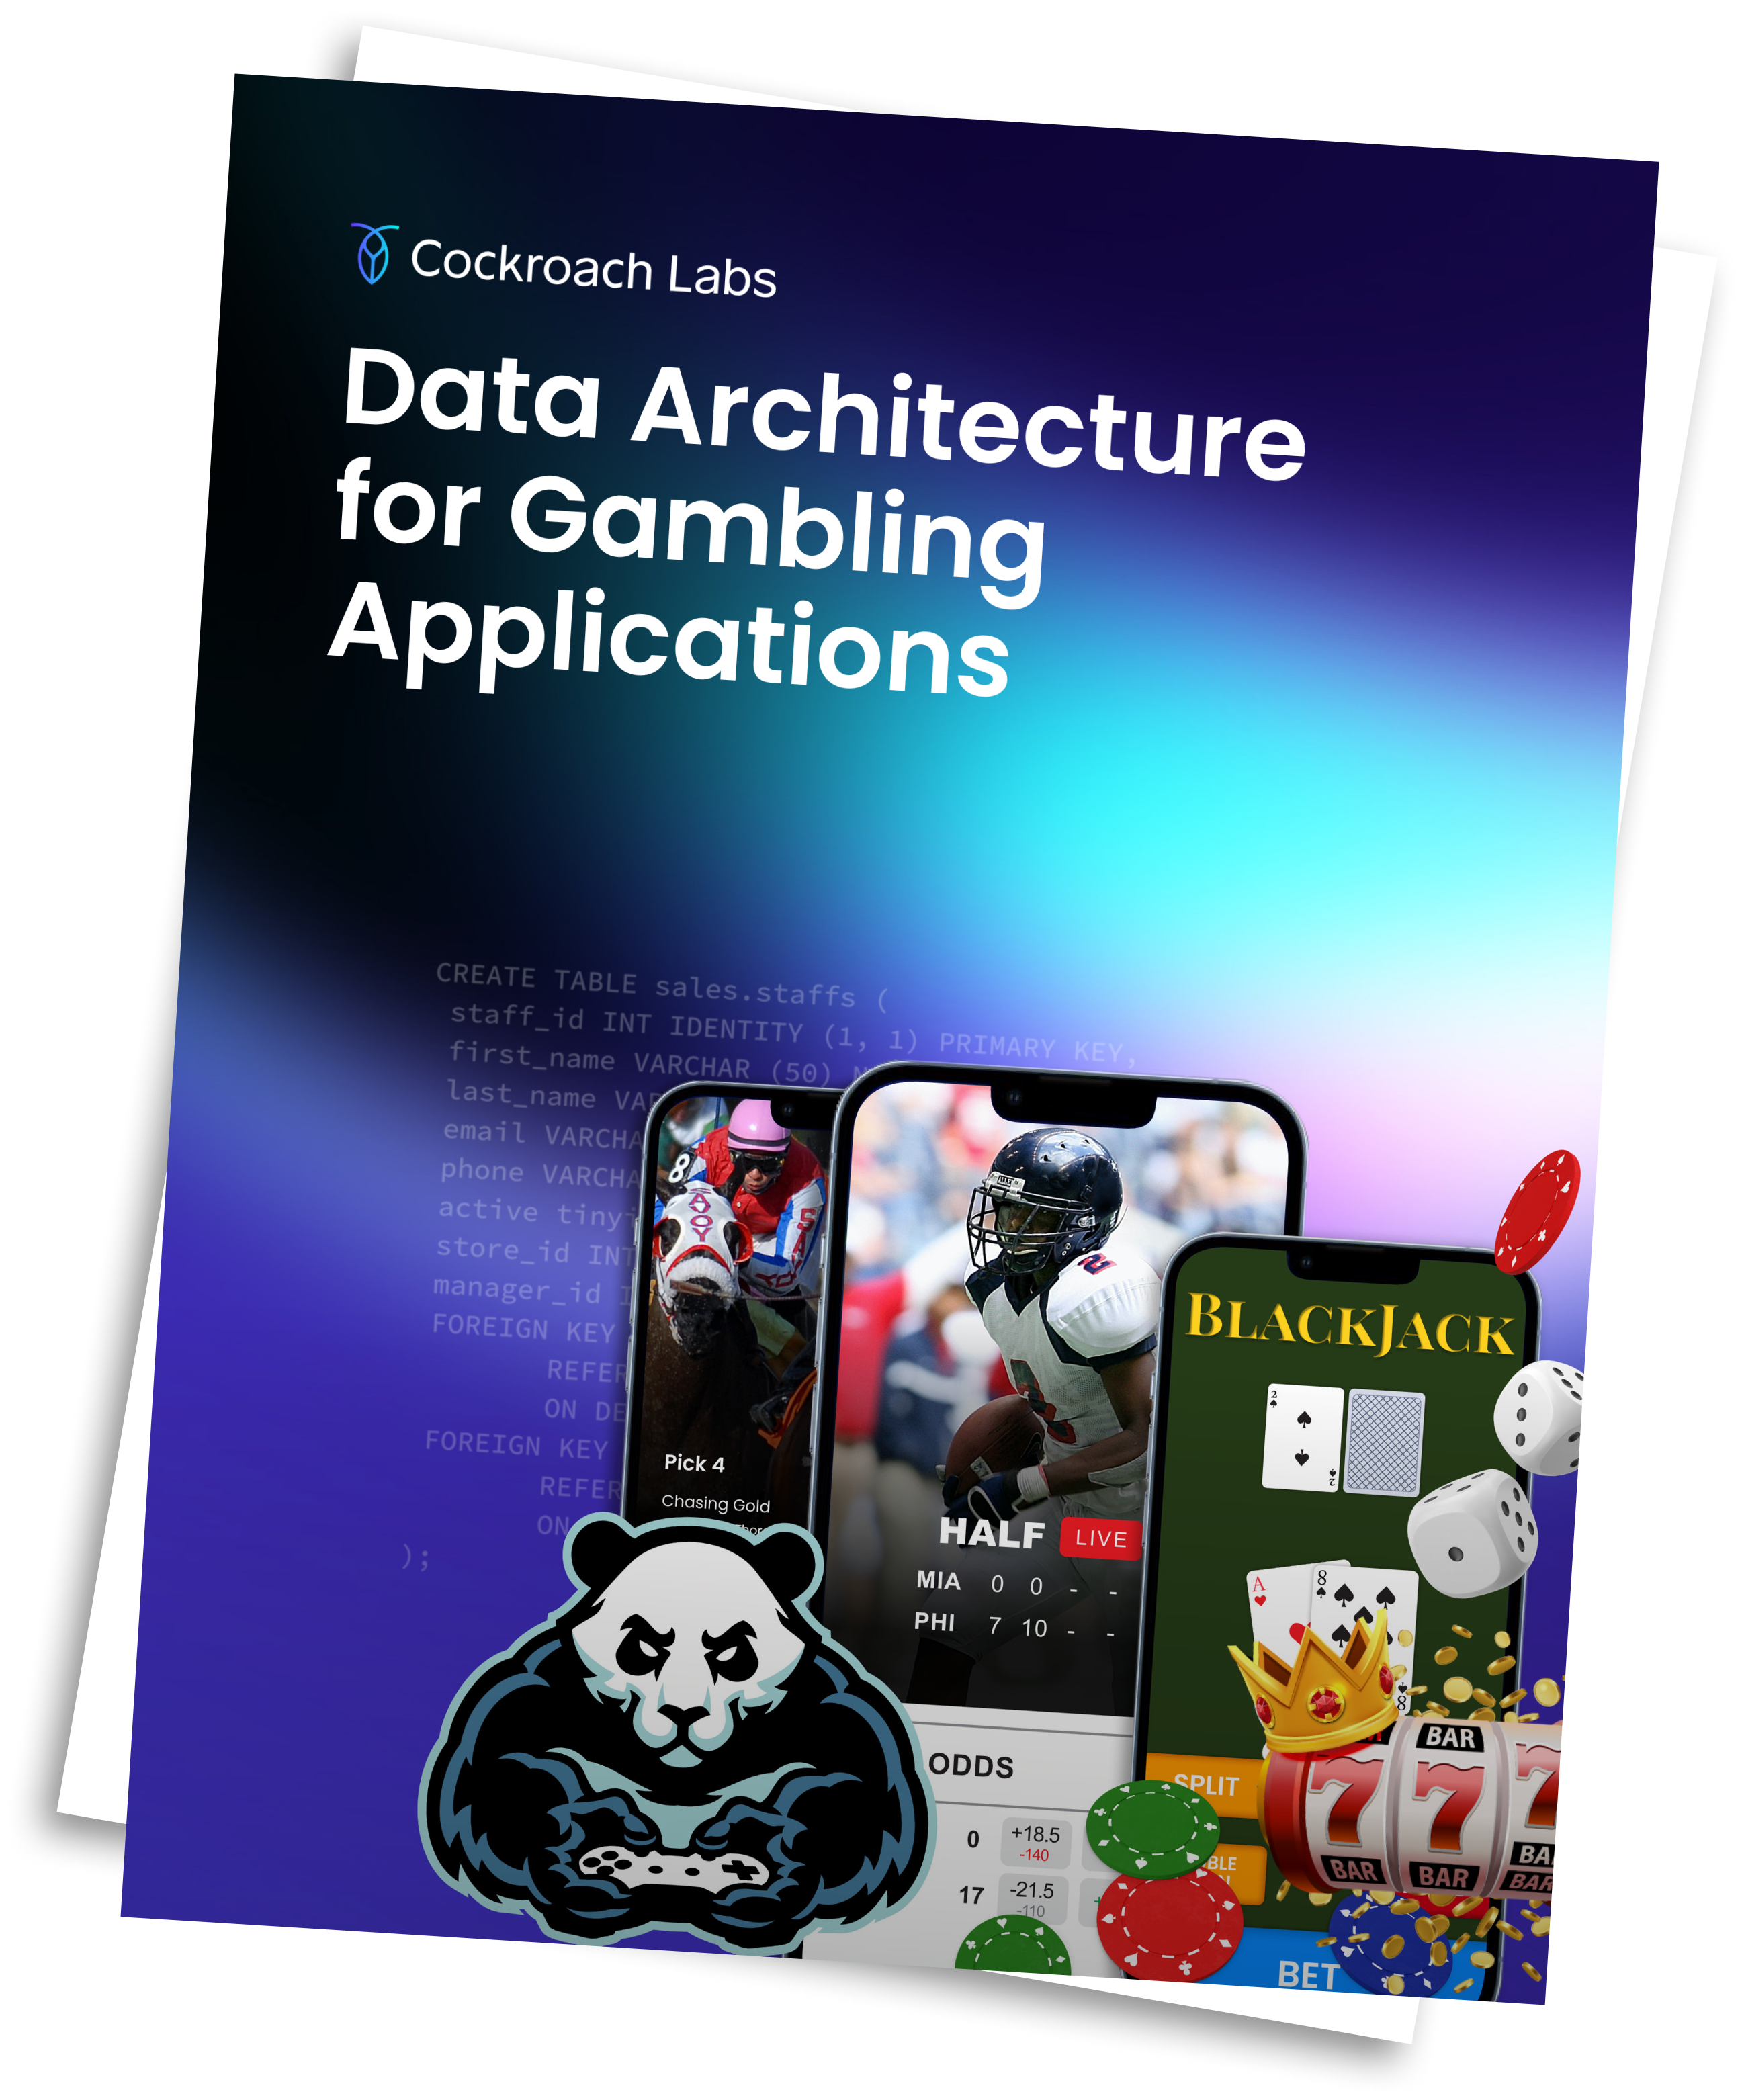 Data architecture for gambling applications | Cockroach Labs